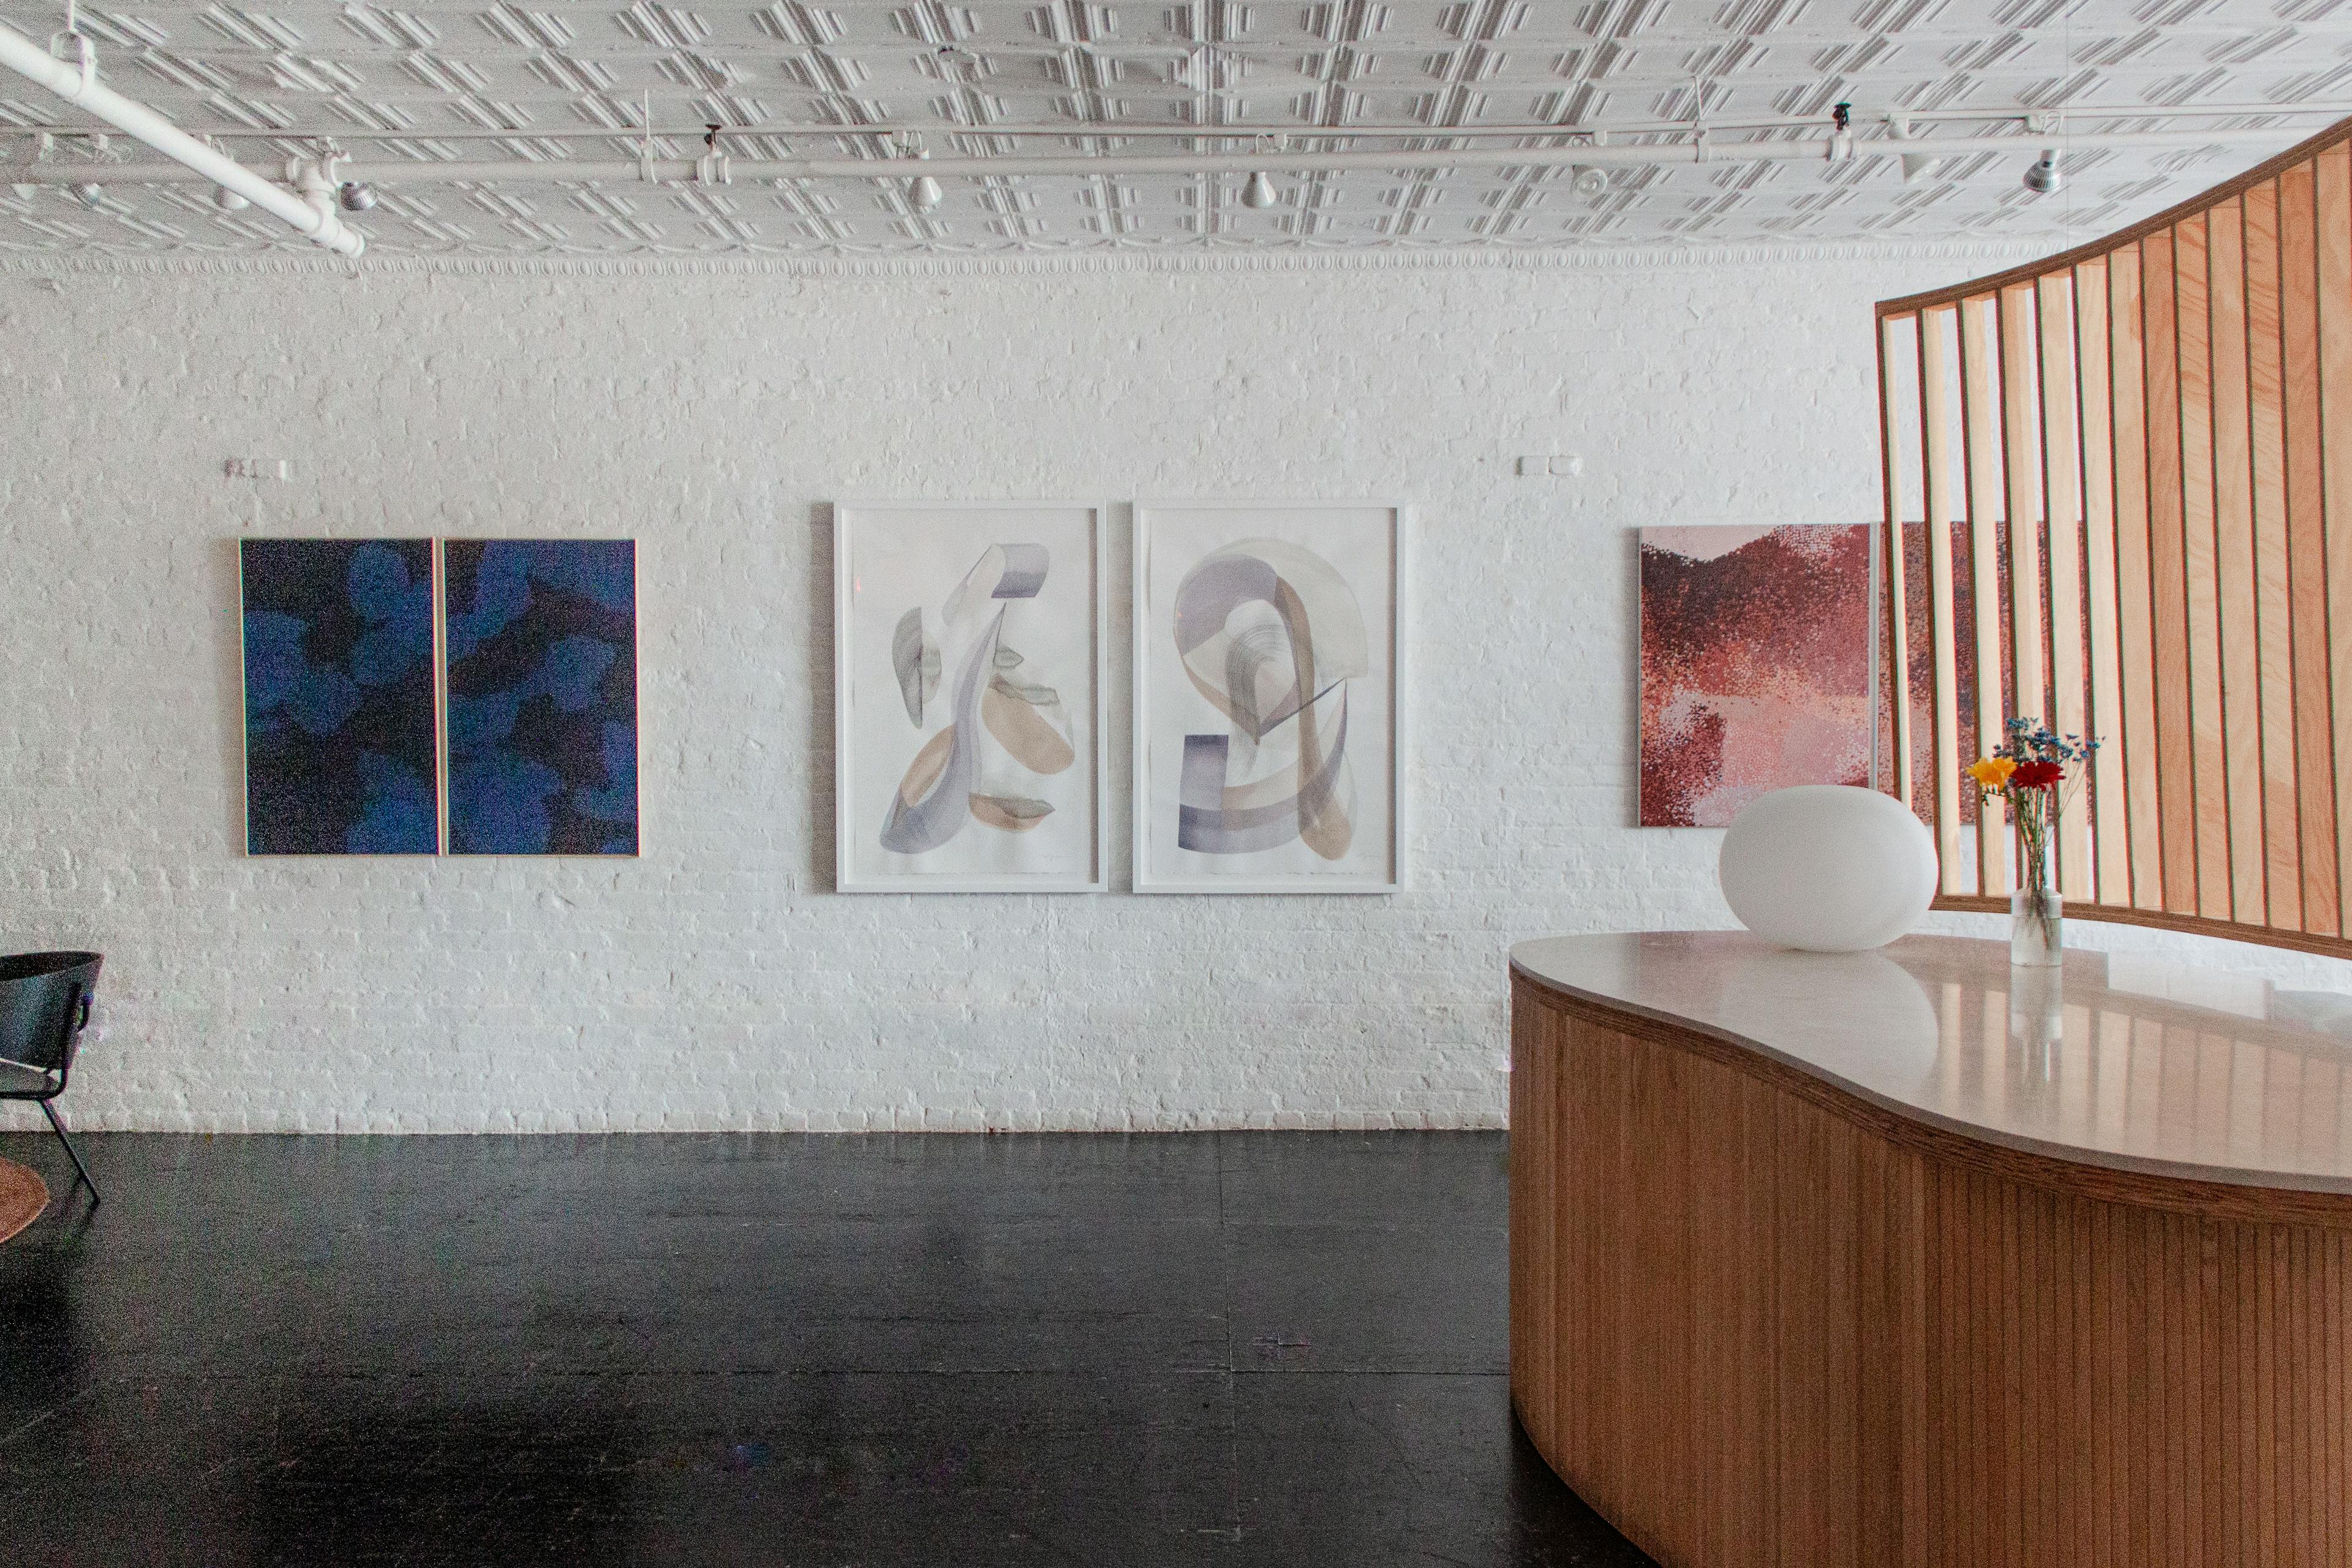 A dark blue diptych by artist Carrie Crawford, two abstract gestural paintings by artist Laura Naples, and a painting with repeating red and pink polka dots by Misato Suzuki, on a white brick wall at the Uprise Art showroom for the '23 collection.